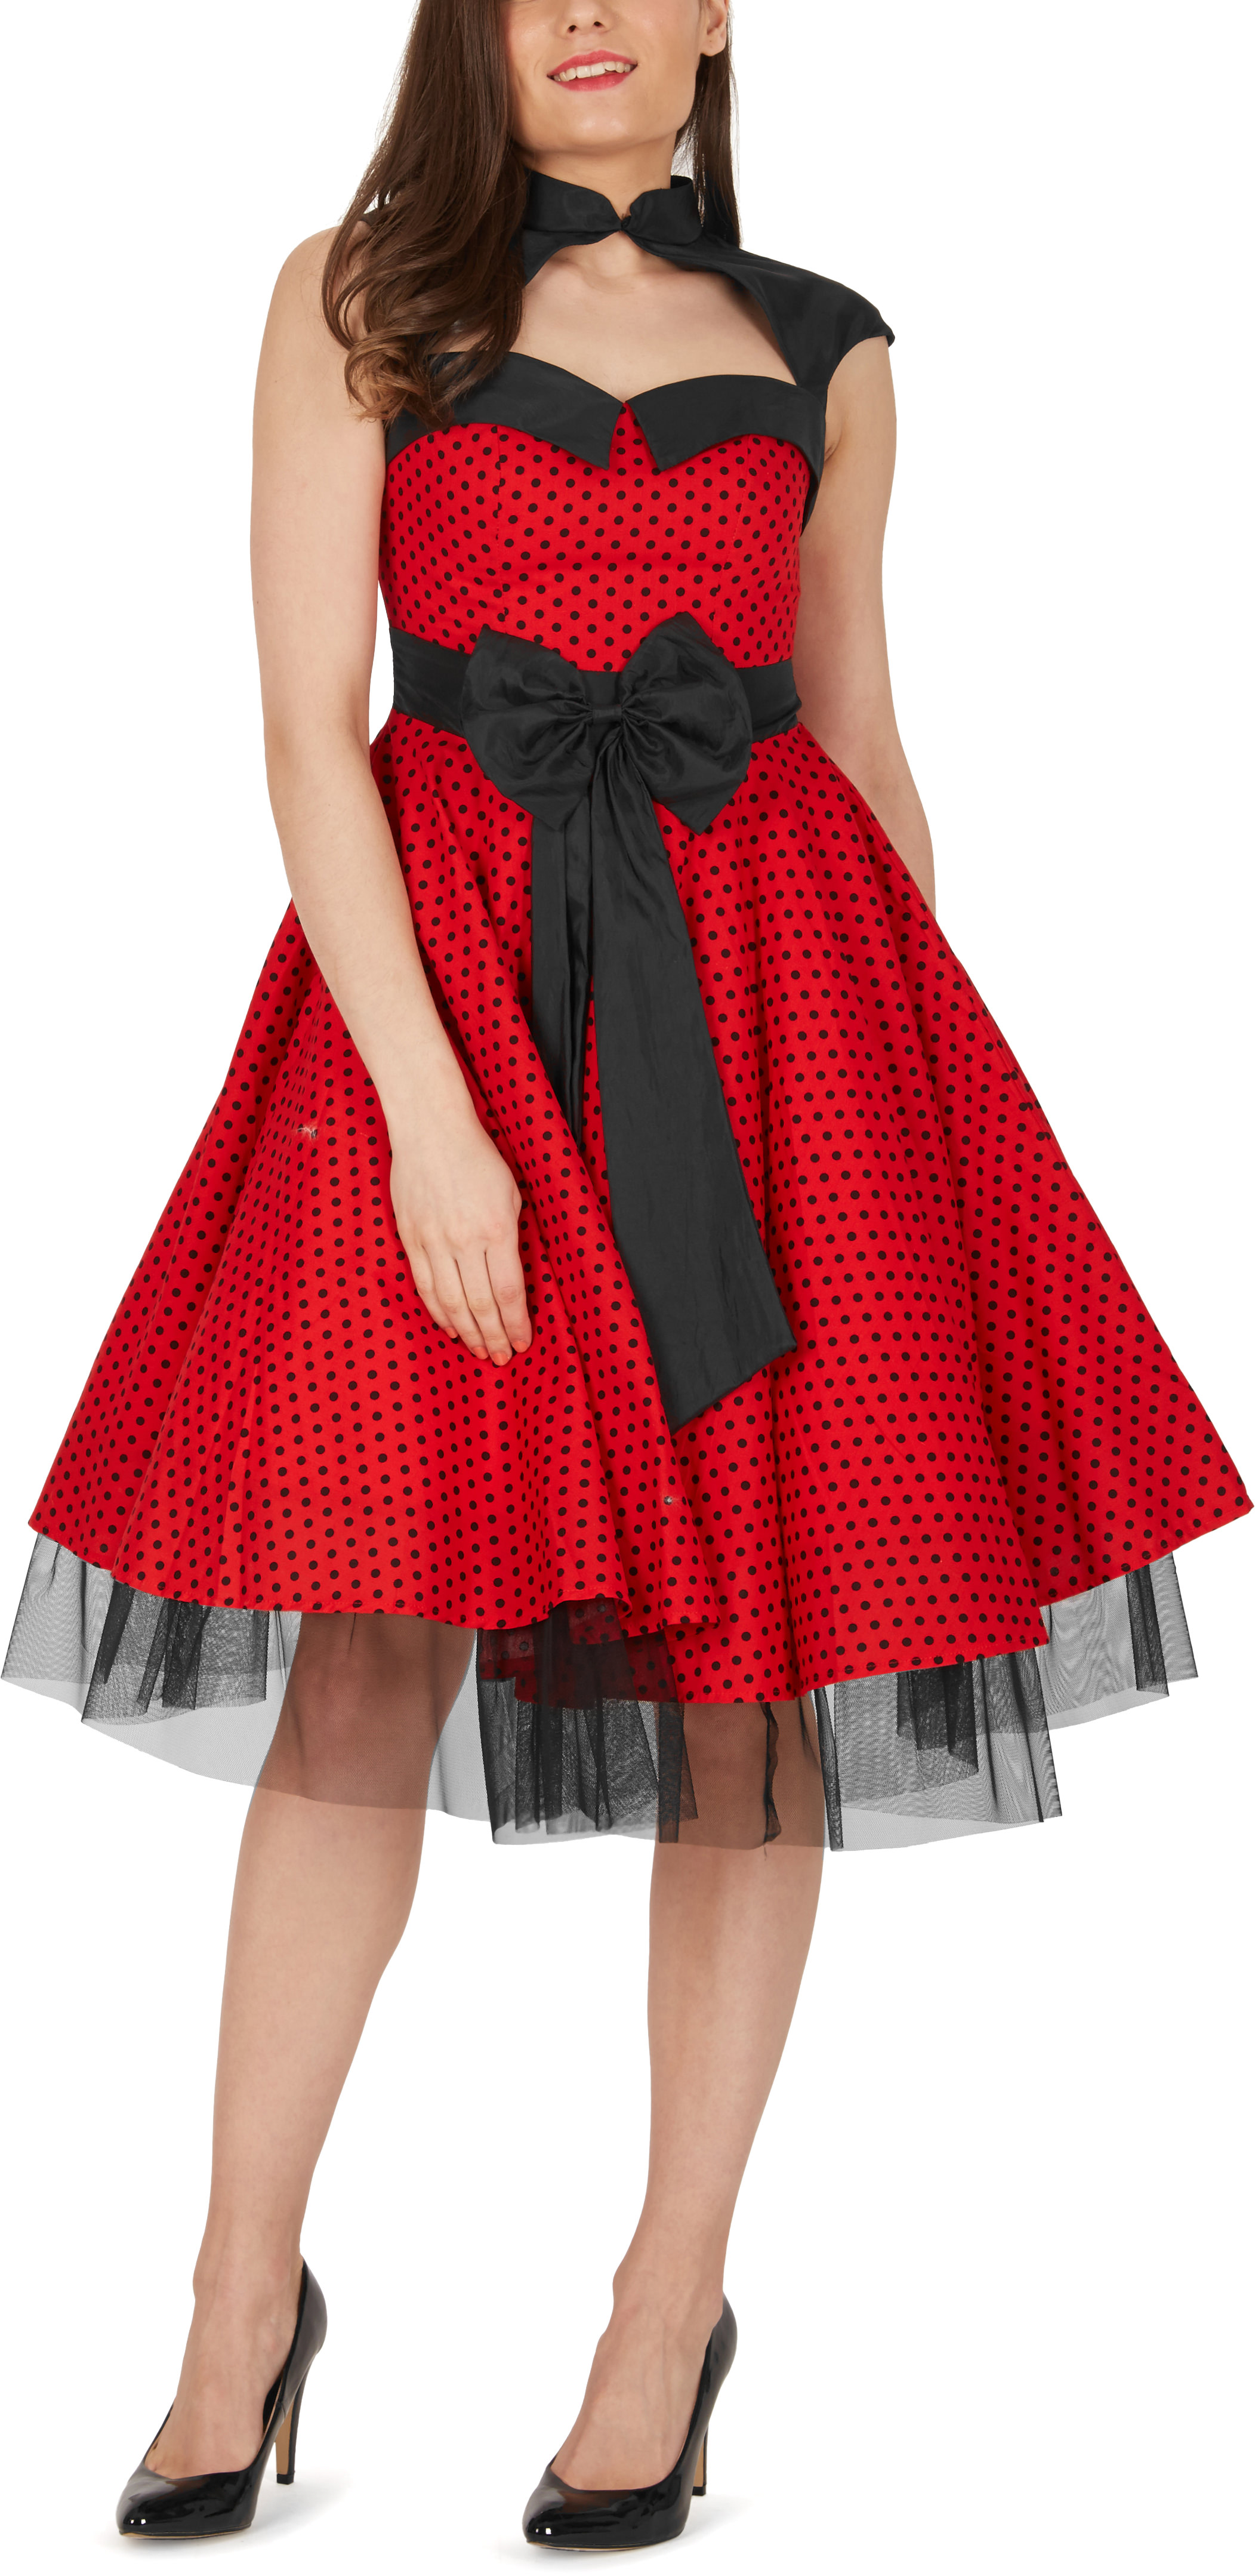 Athena' Polka Dot Large Bow 50s Rockabilly Evening Swing Pin Up Prom ...